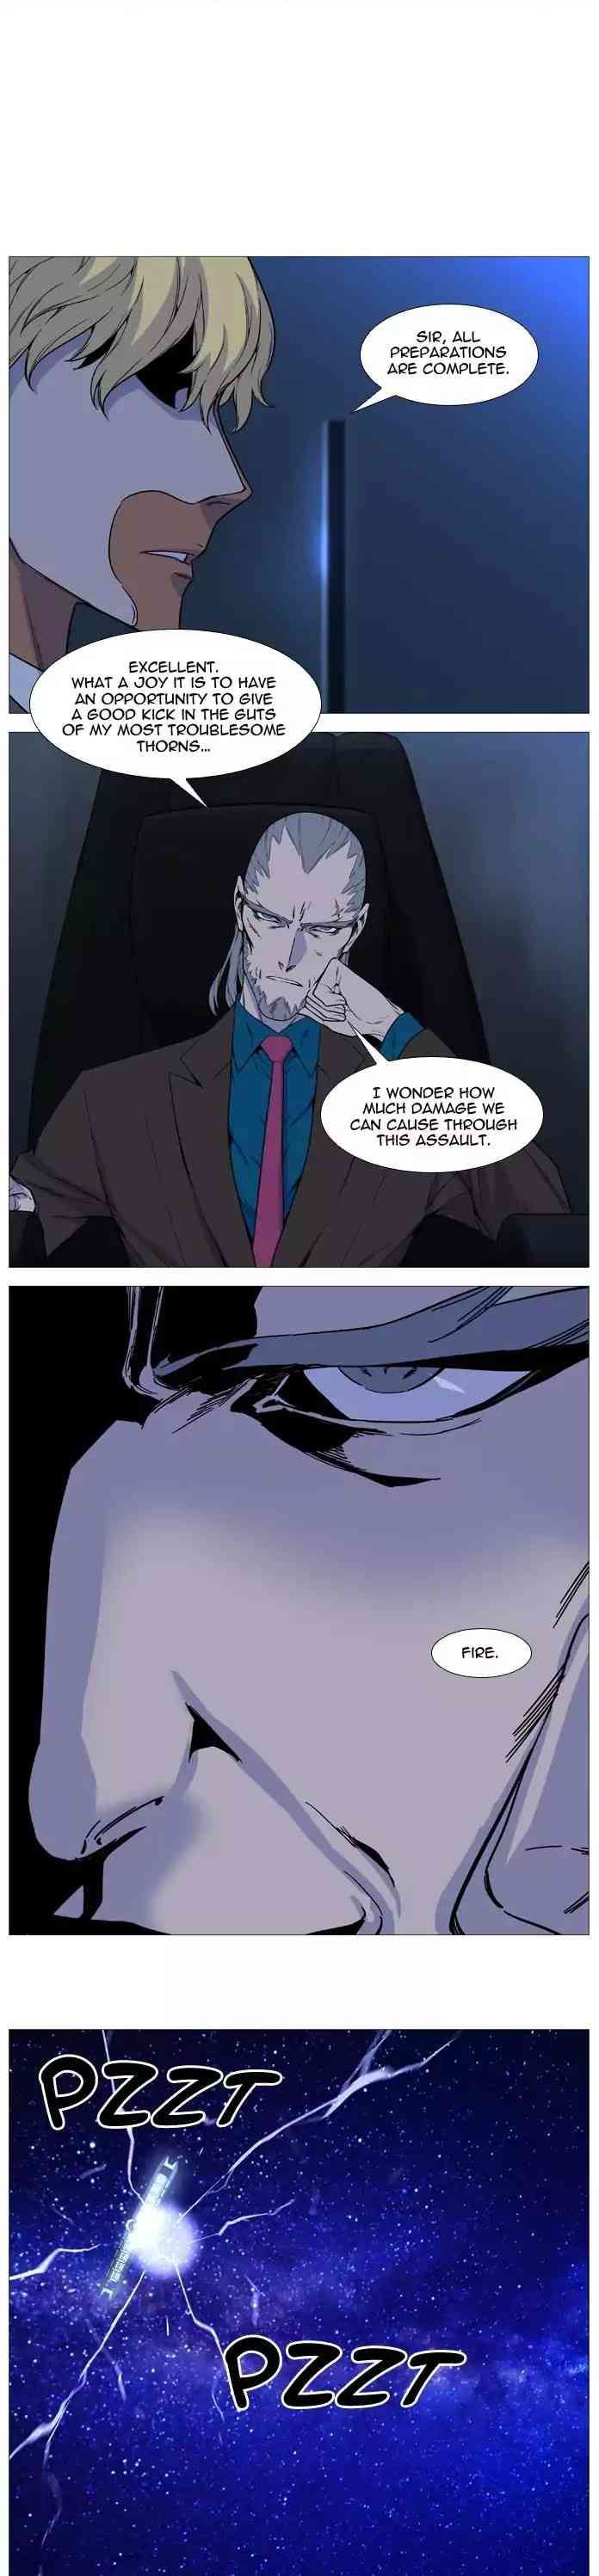 Noblesse Chapter 526_ Ep.525 page 10